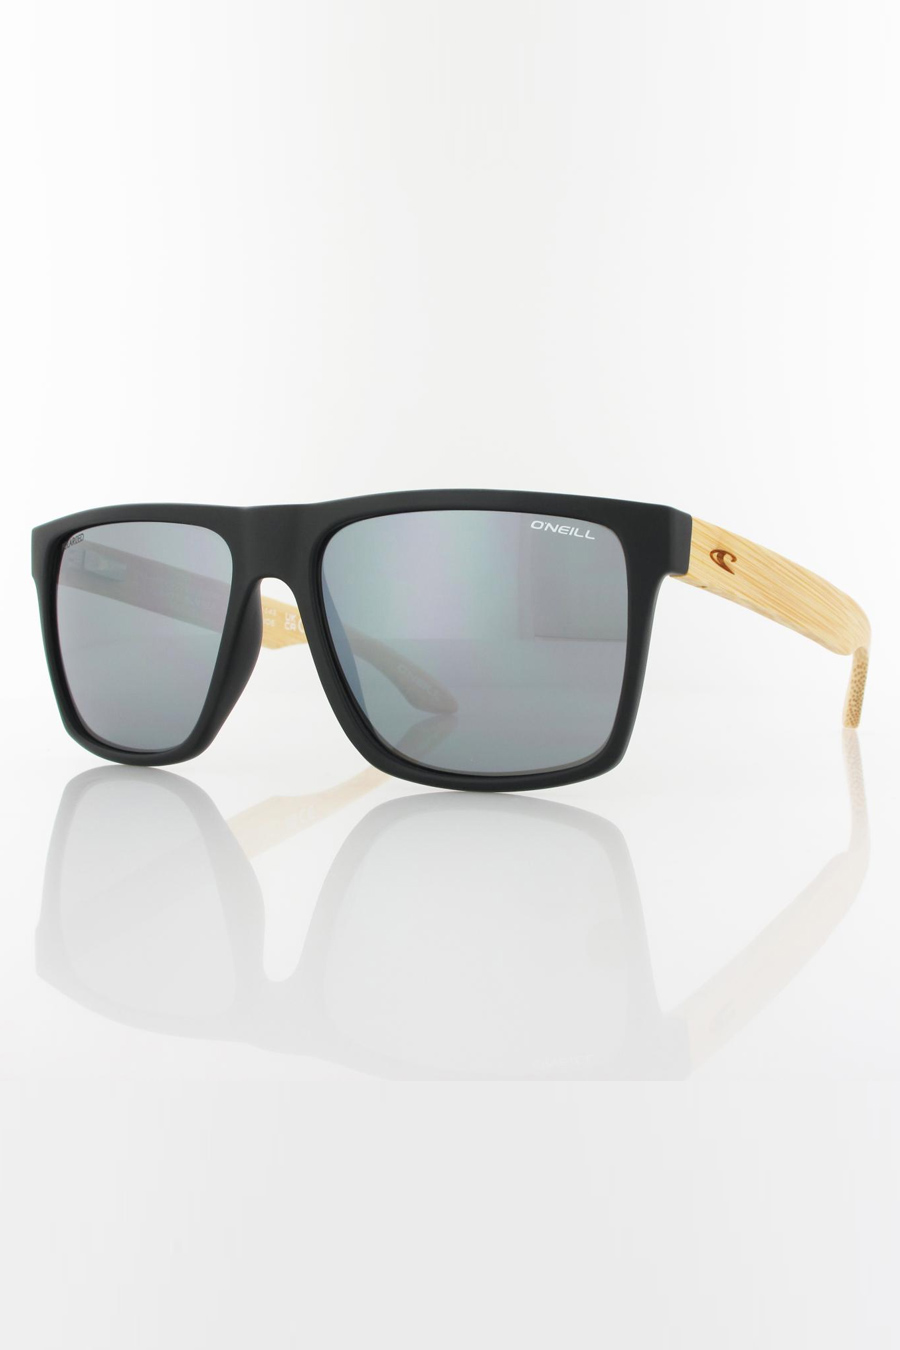 Saulesbrilles ONEILL ONS-HARWOOD20-104P